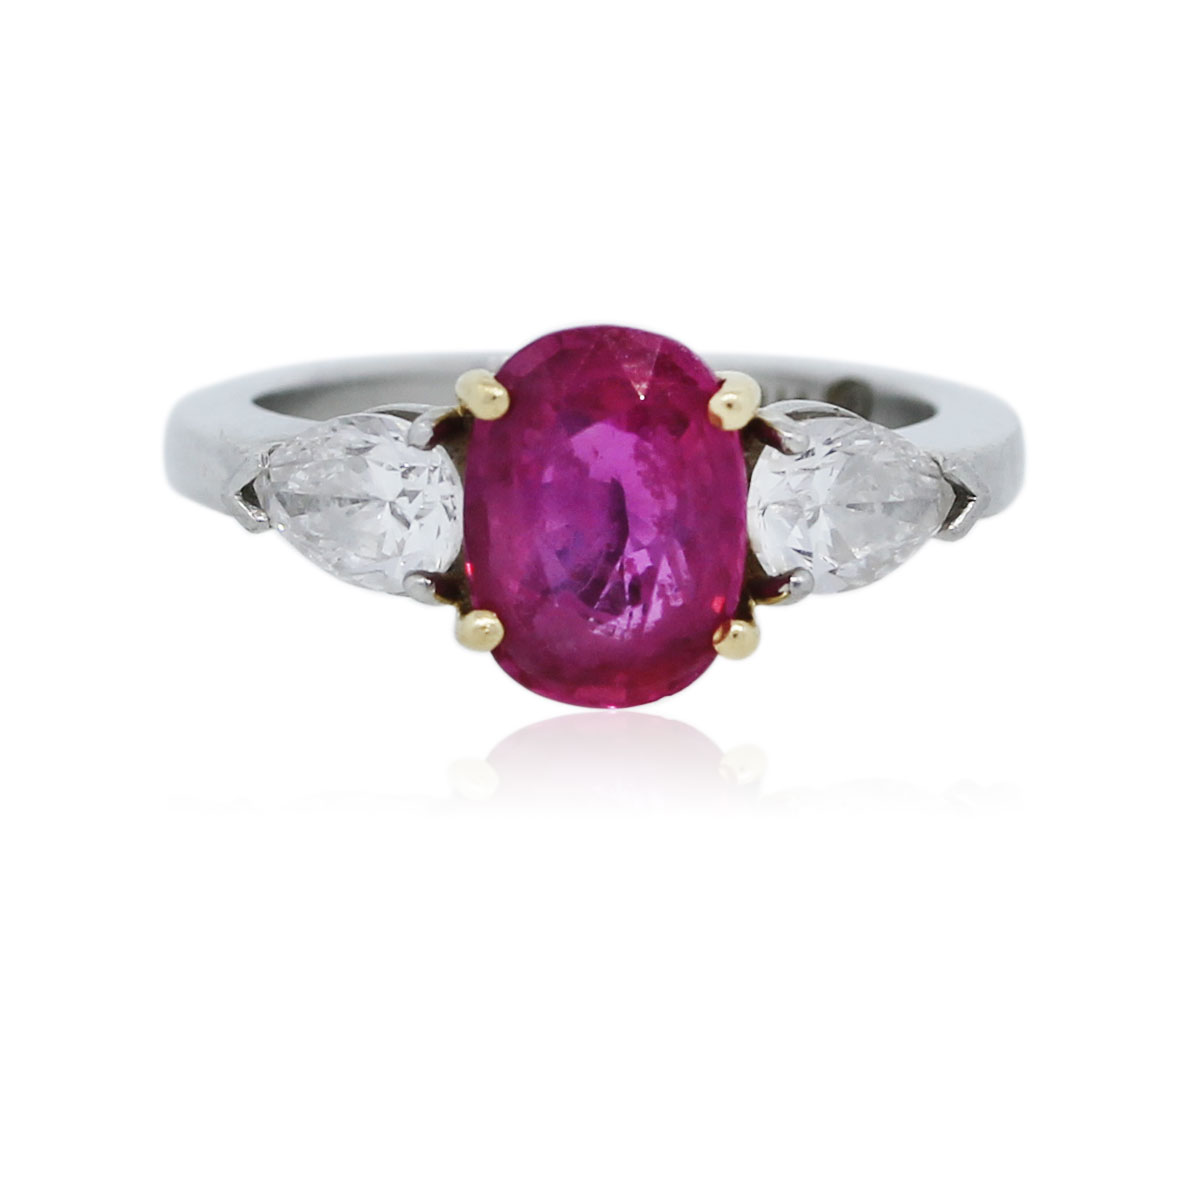 You are viewing this Pink Sapphire and Diamond Platinum 3 Stone Ring!